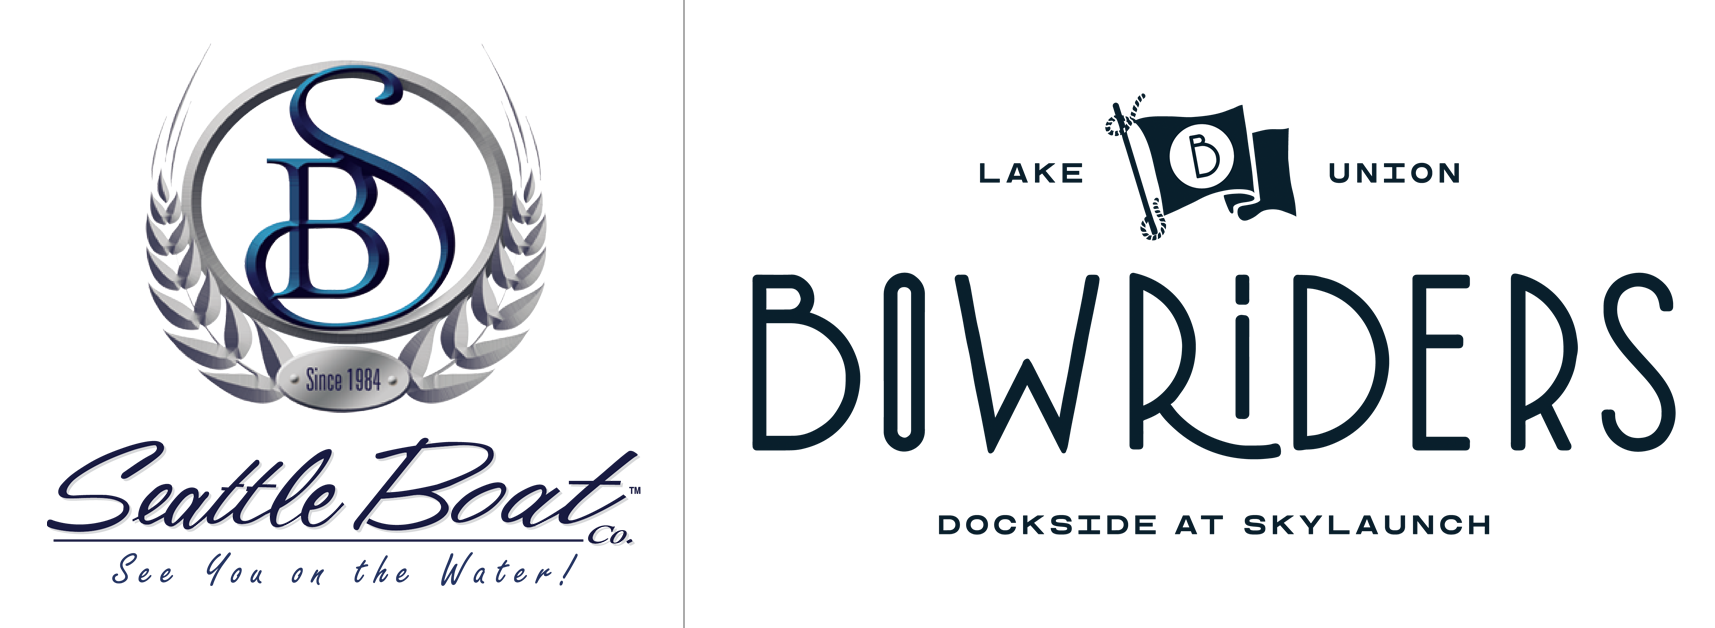 Seattle Boat_Bowriders.png